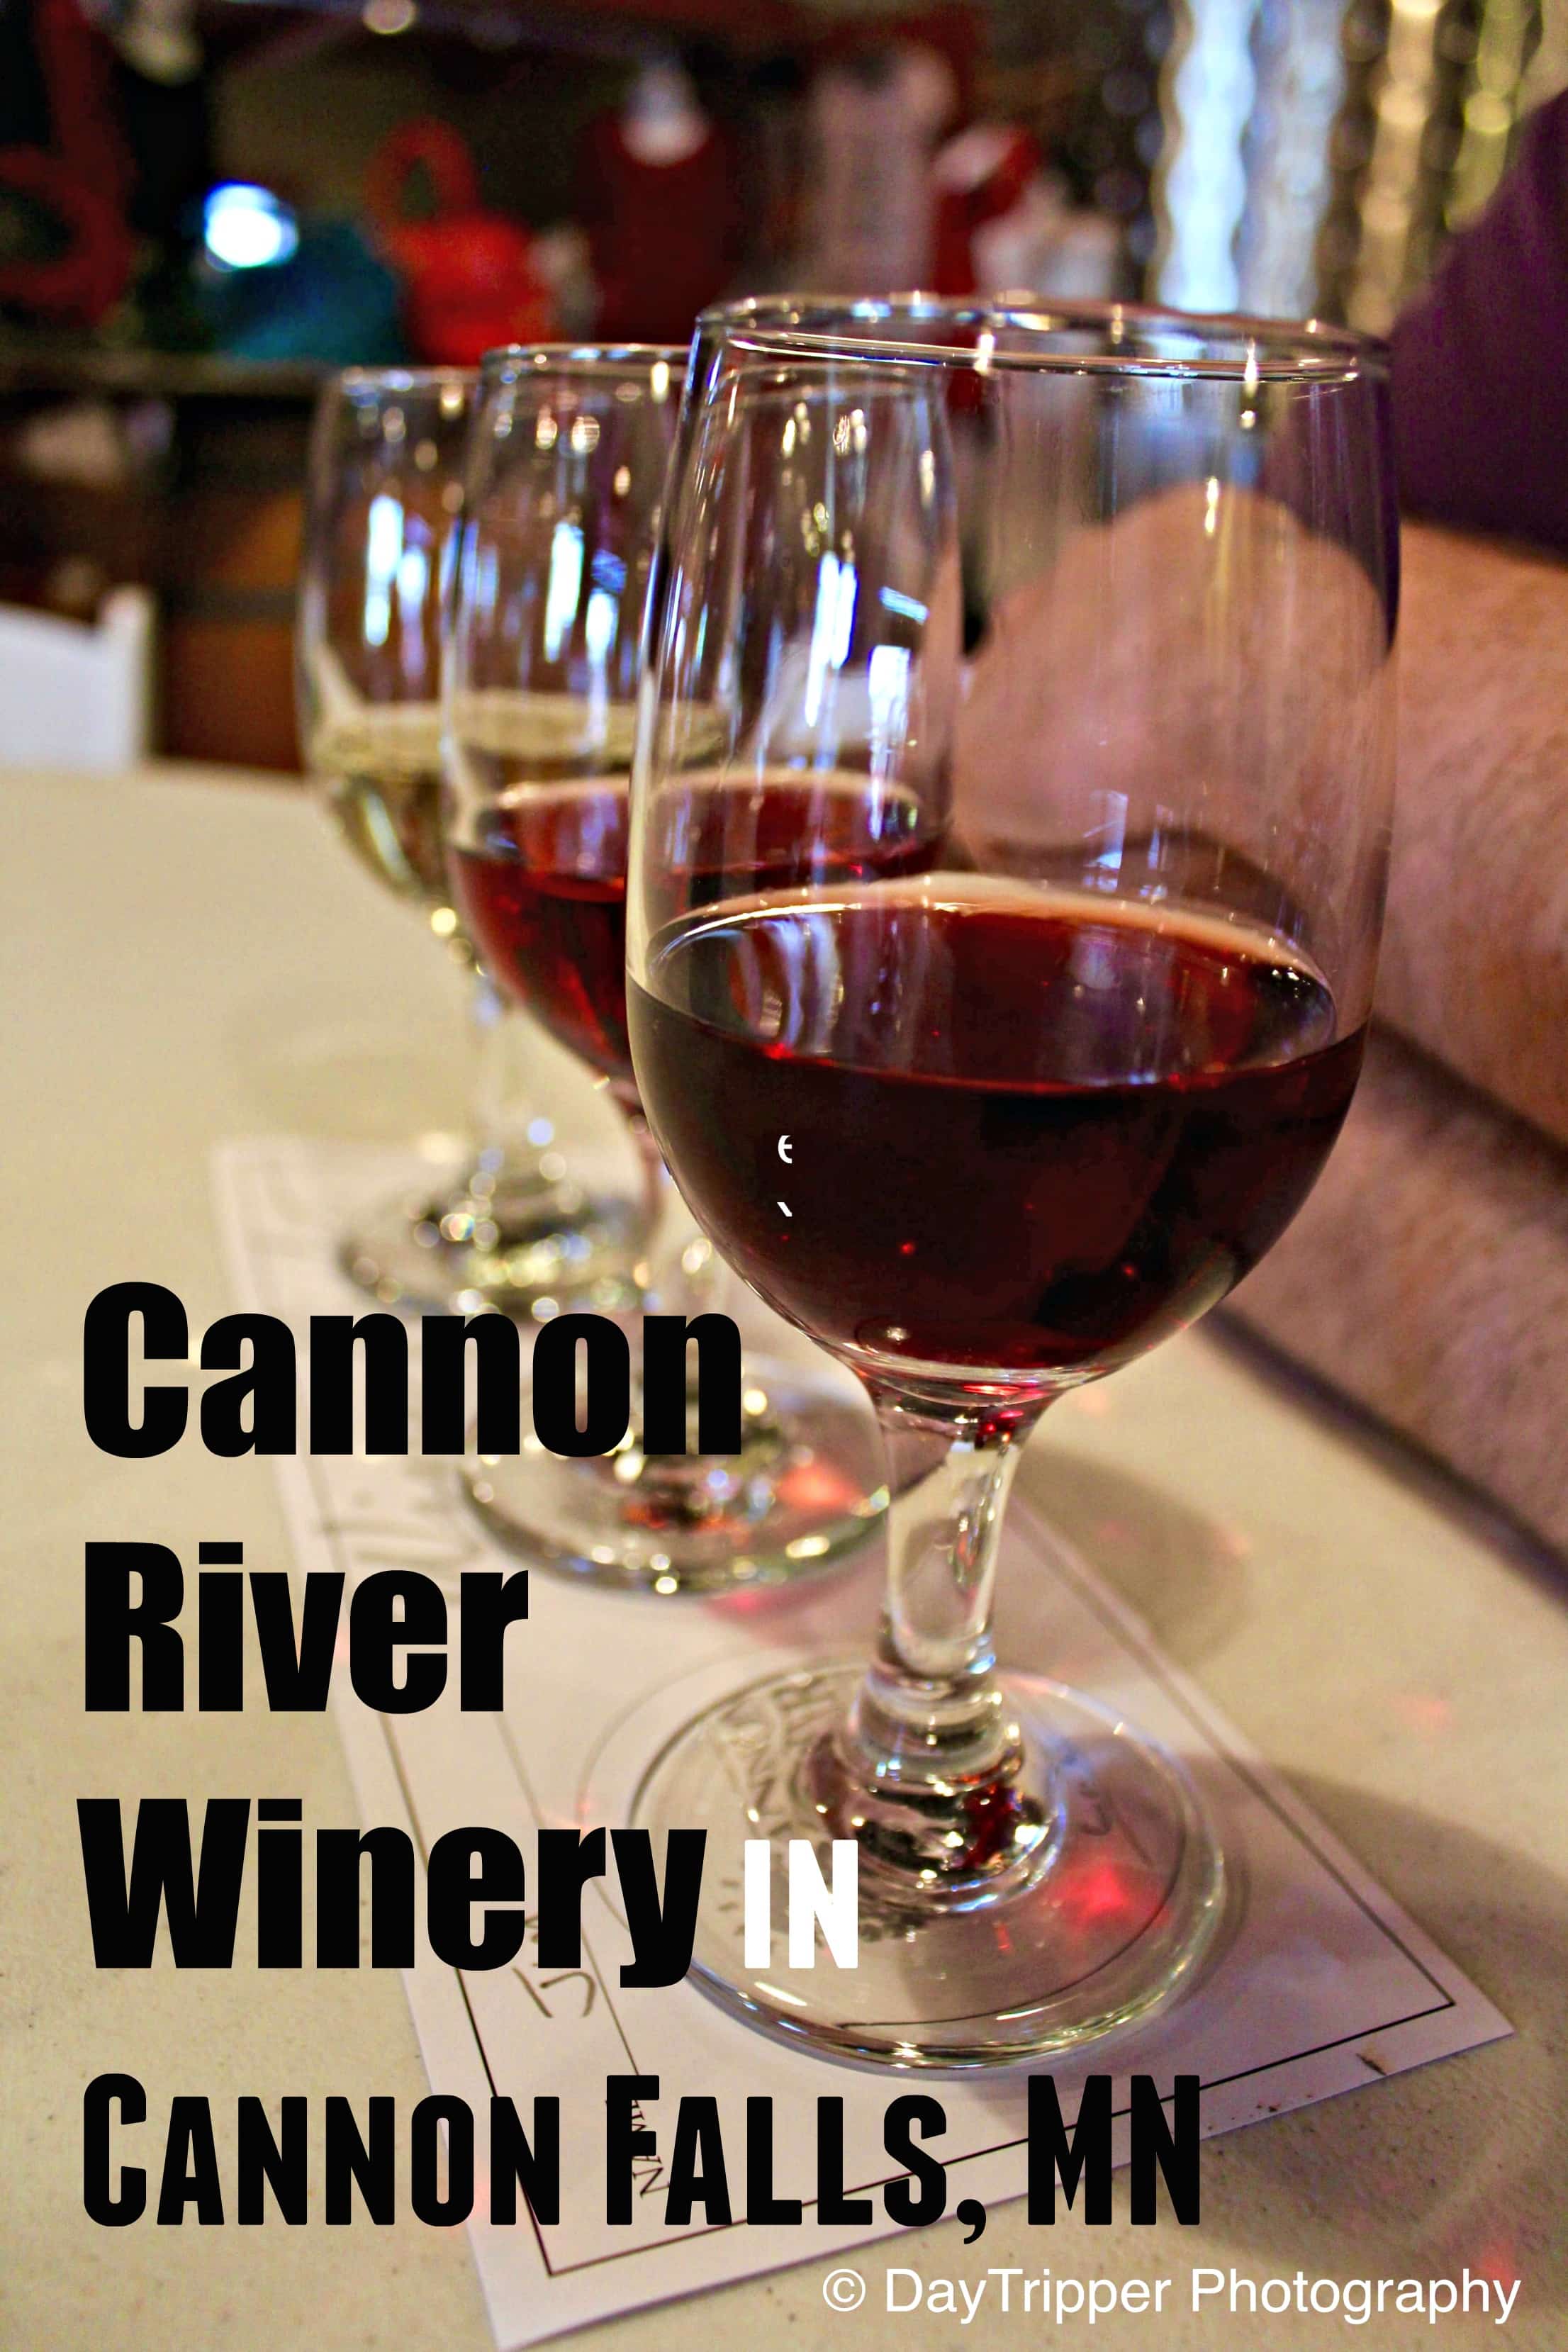 Have you ever done a wine flight? They have them at Cannon River Winery in Cannon Falls